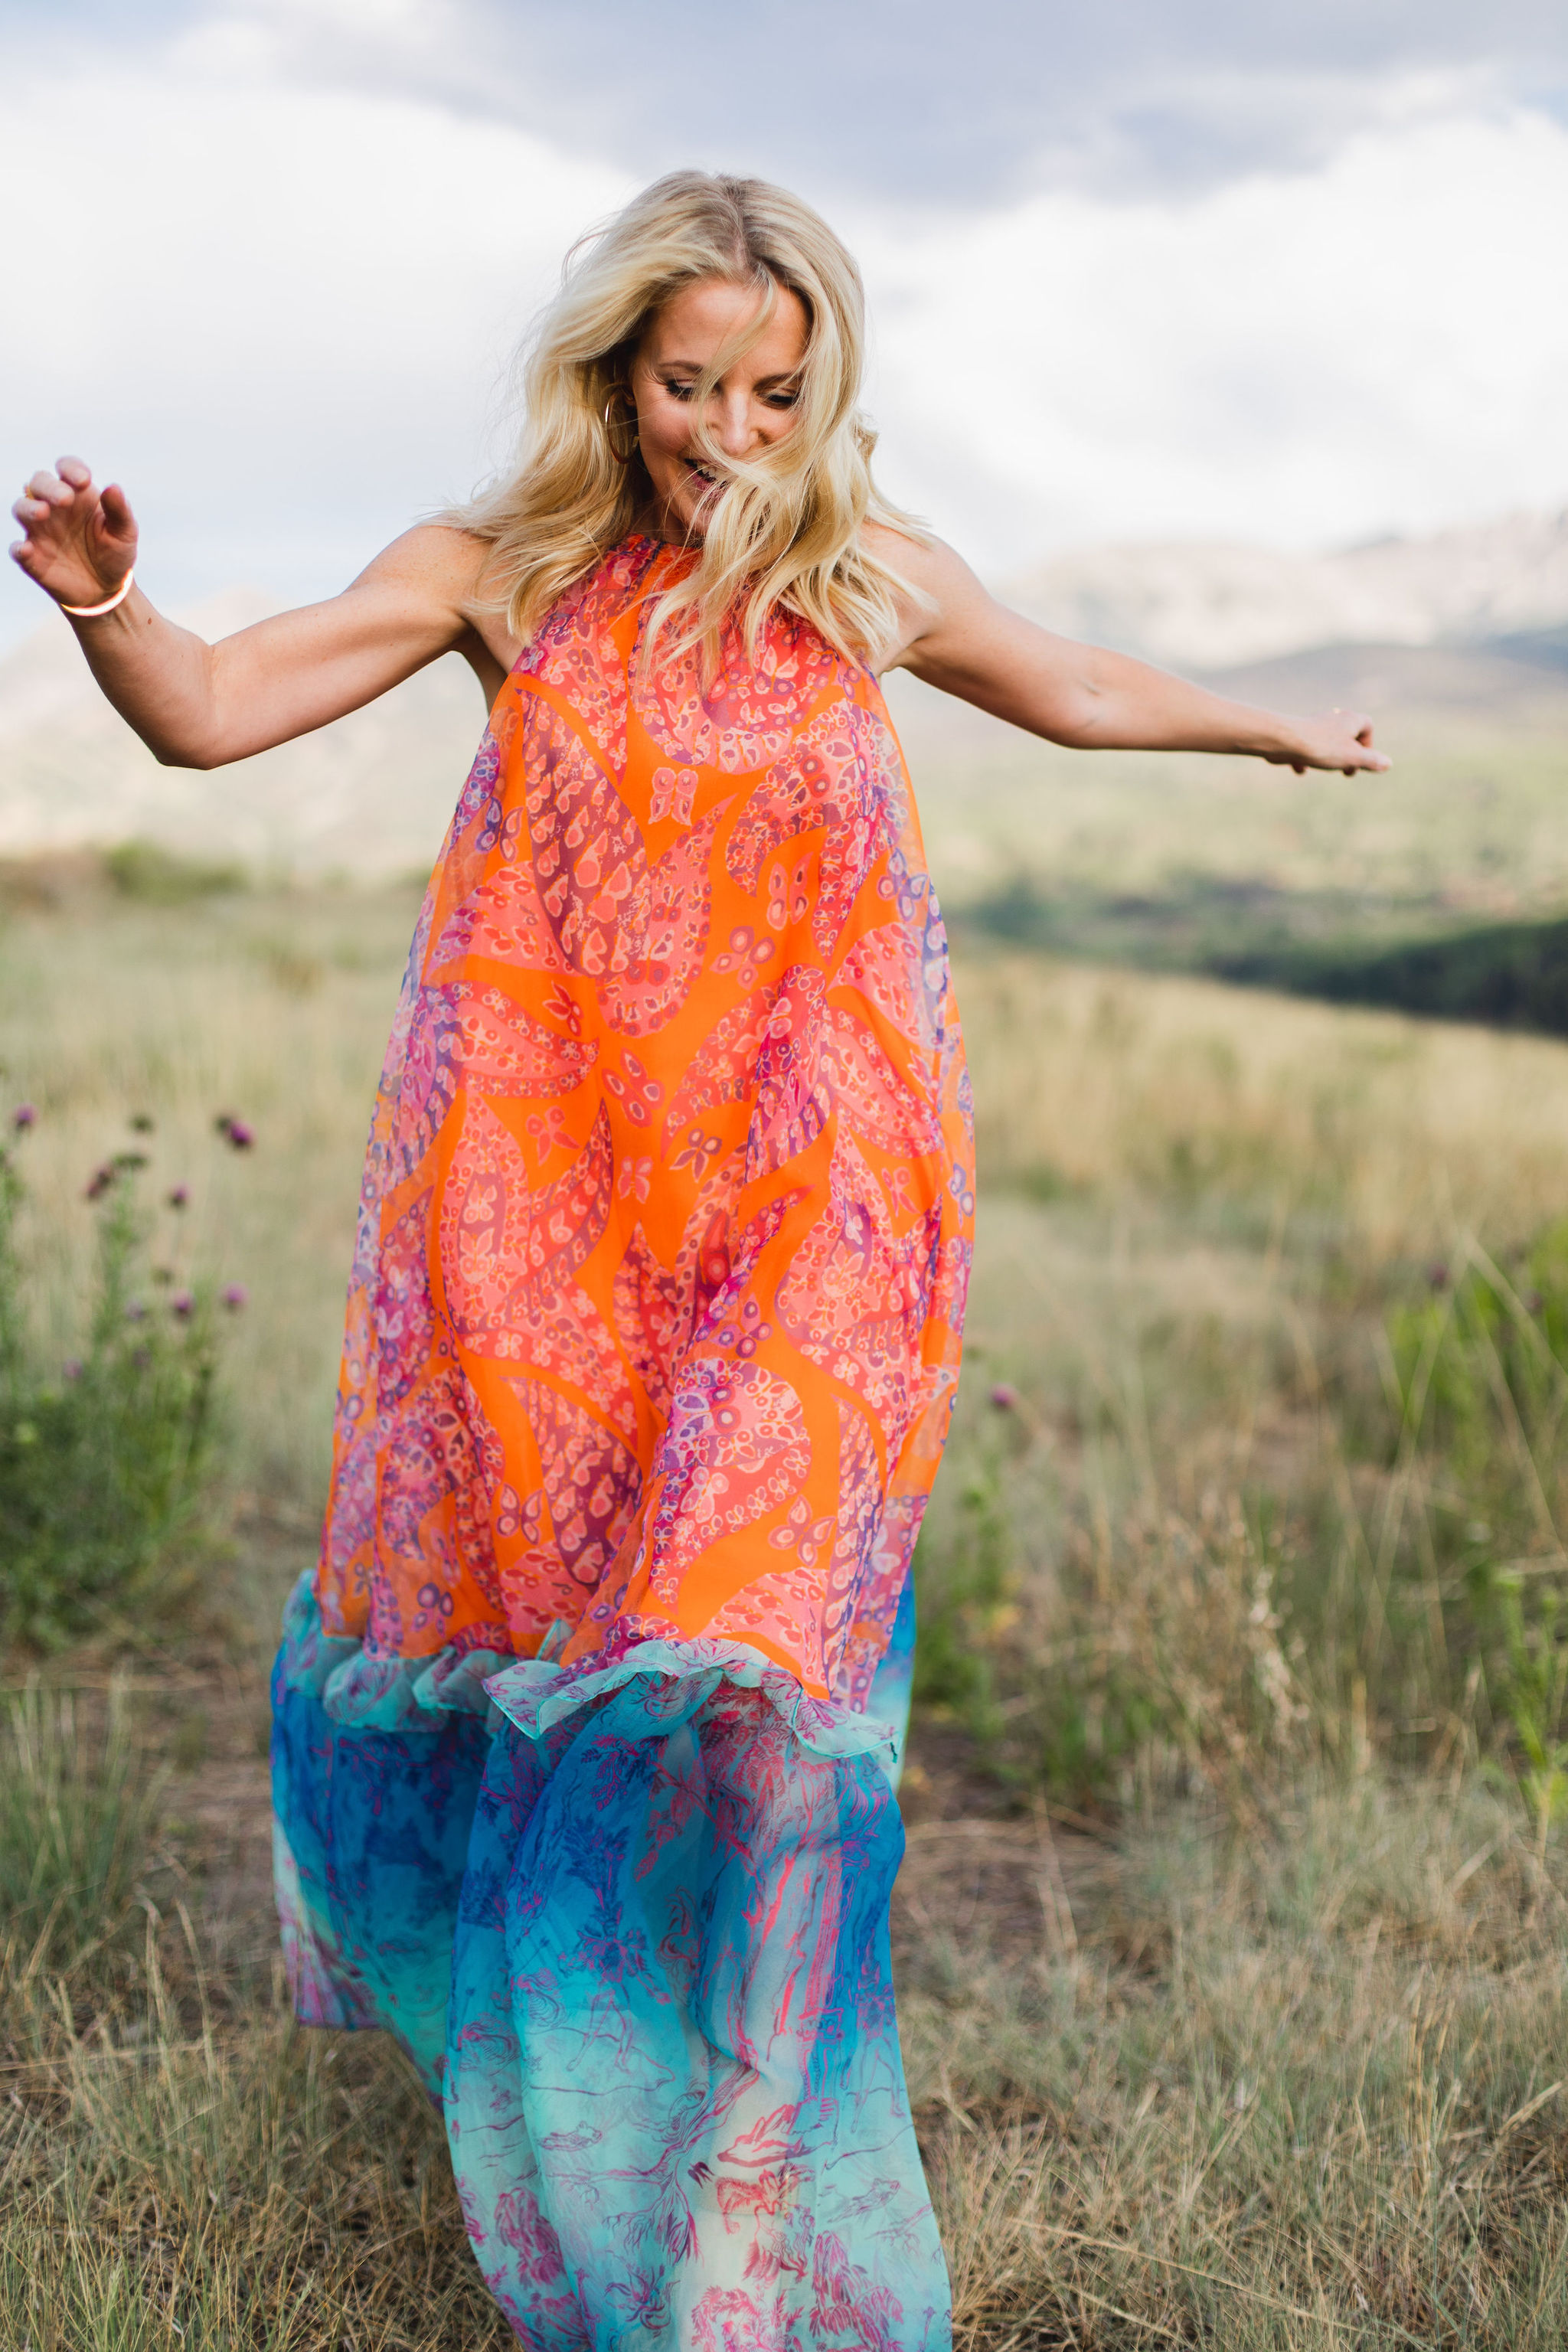 blonde woman wearing trapeze dress in bright colors running through grassy field